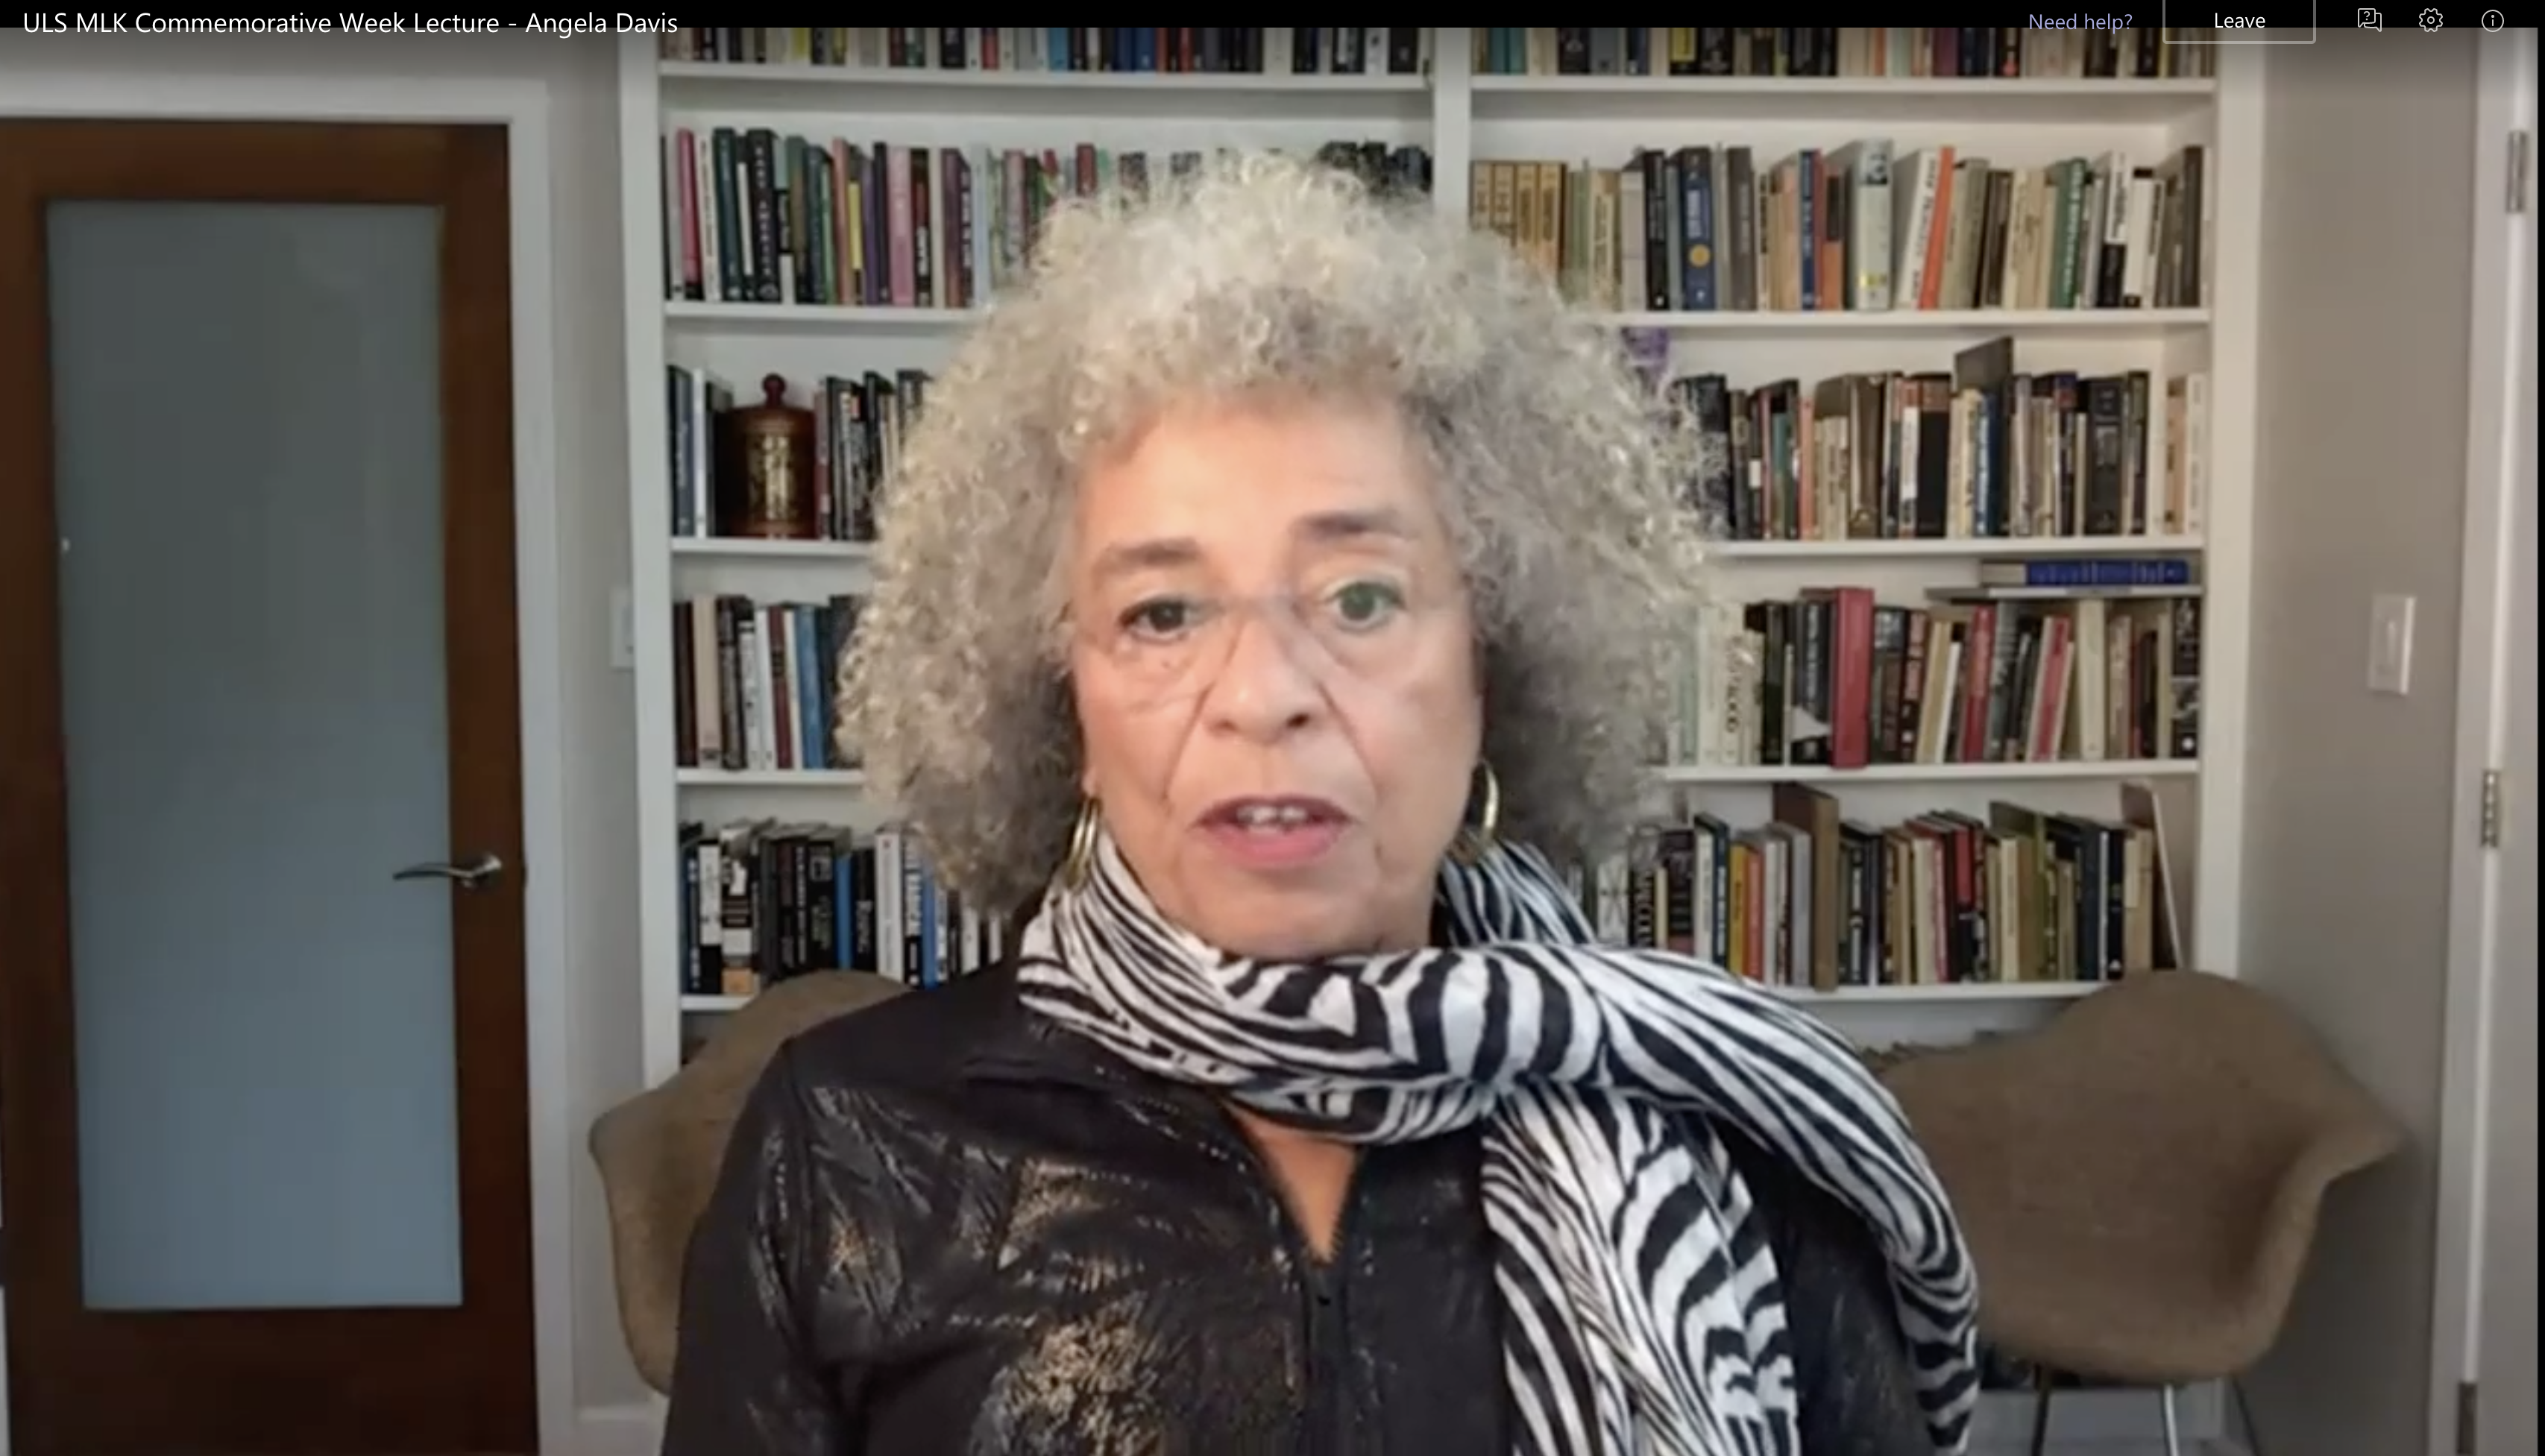 Angela Davis critiques capitalism, systemic injustices during ULS